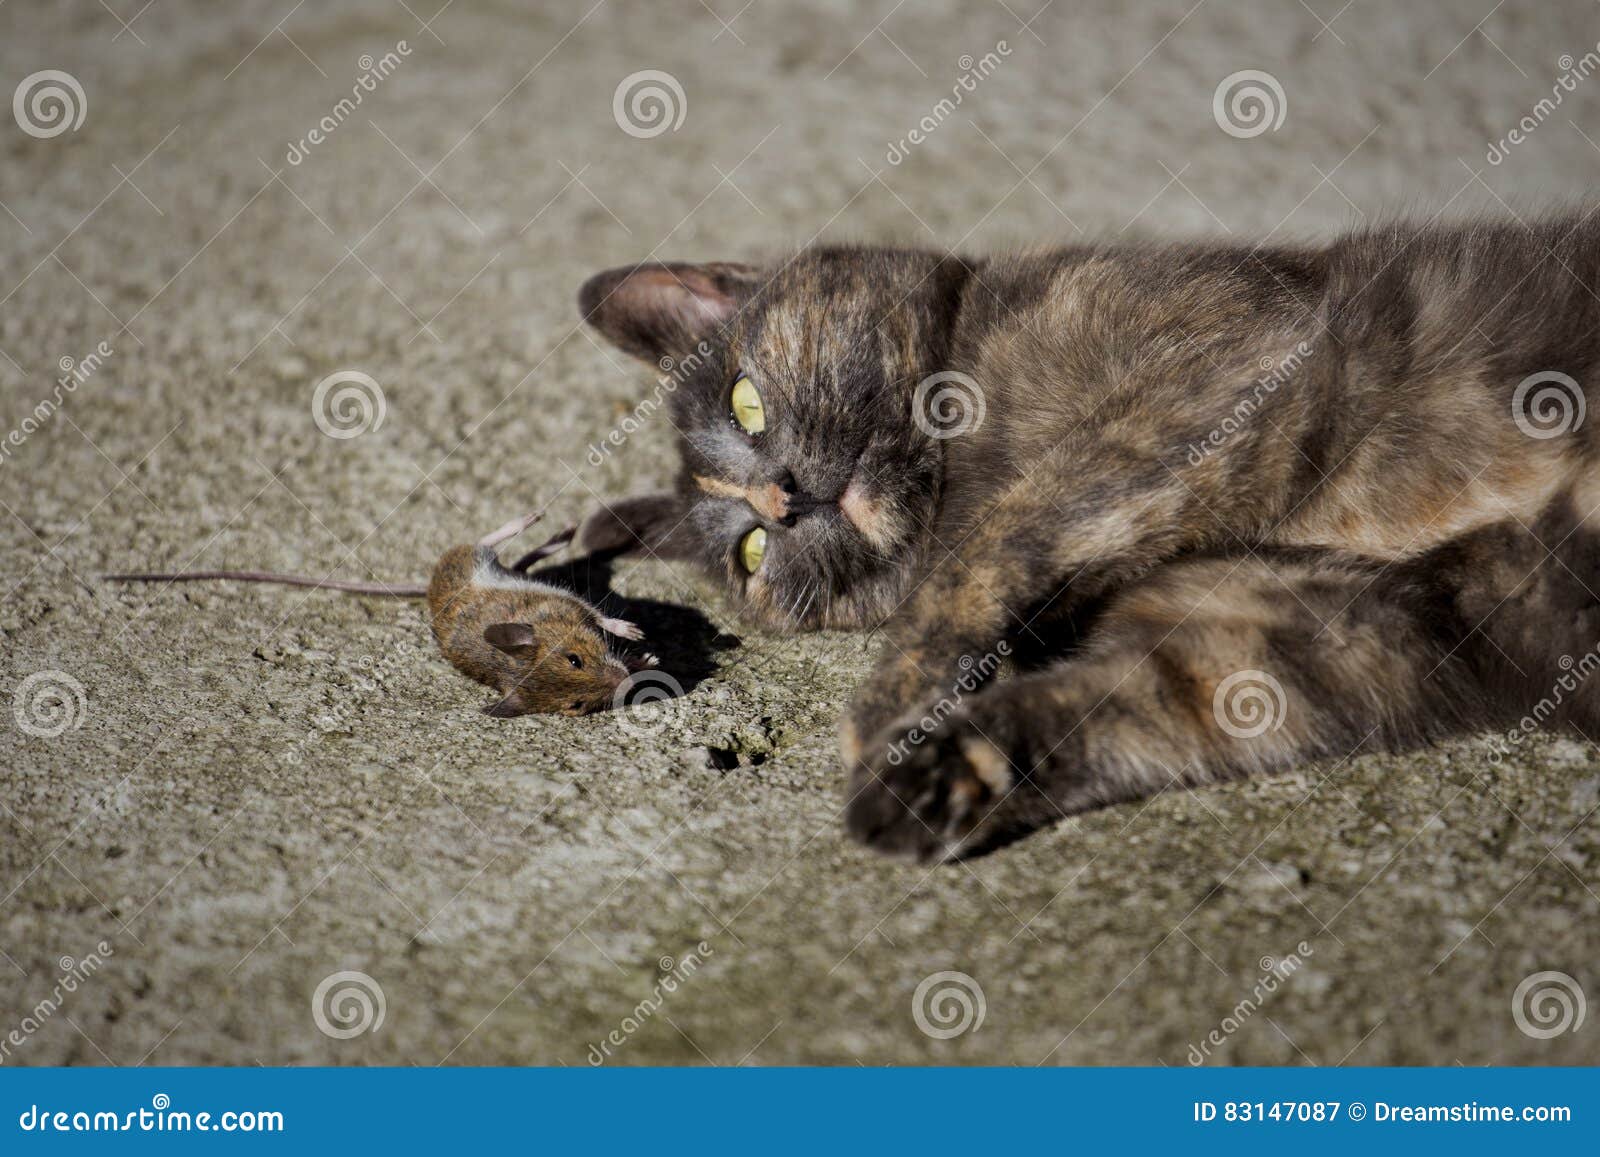 cat and mouse ii